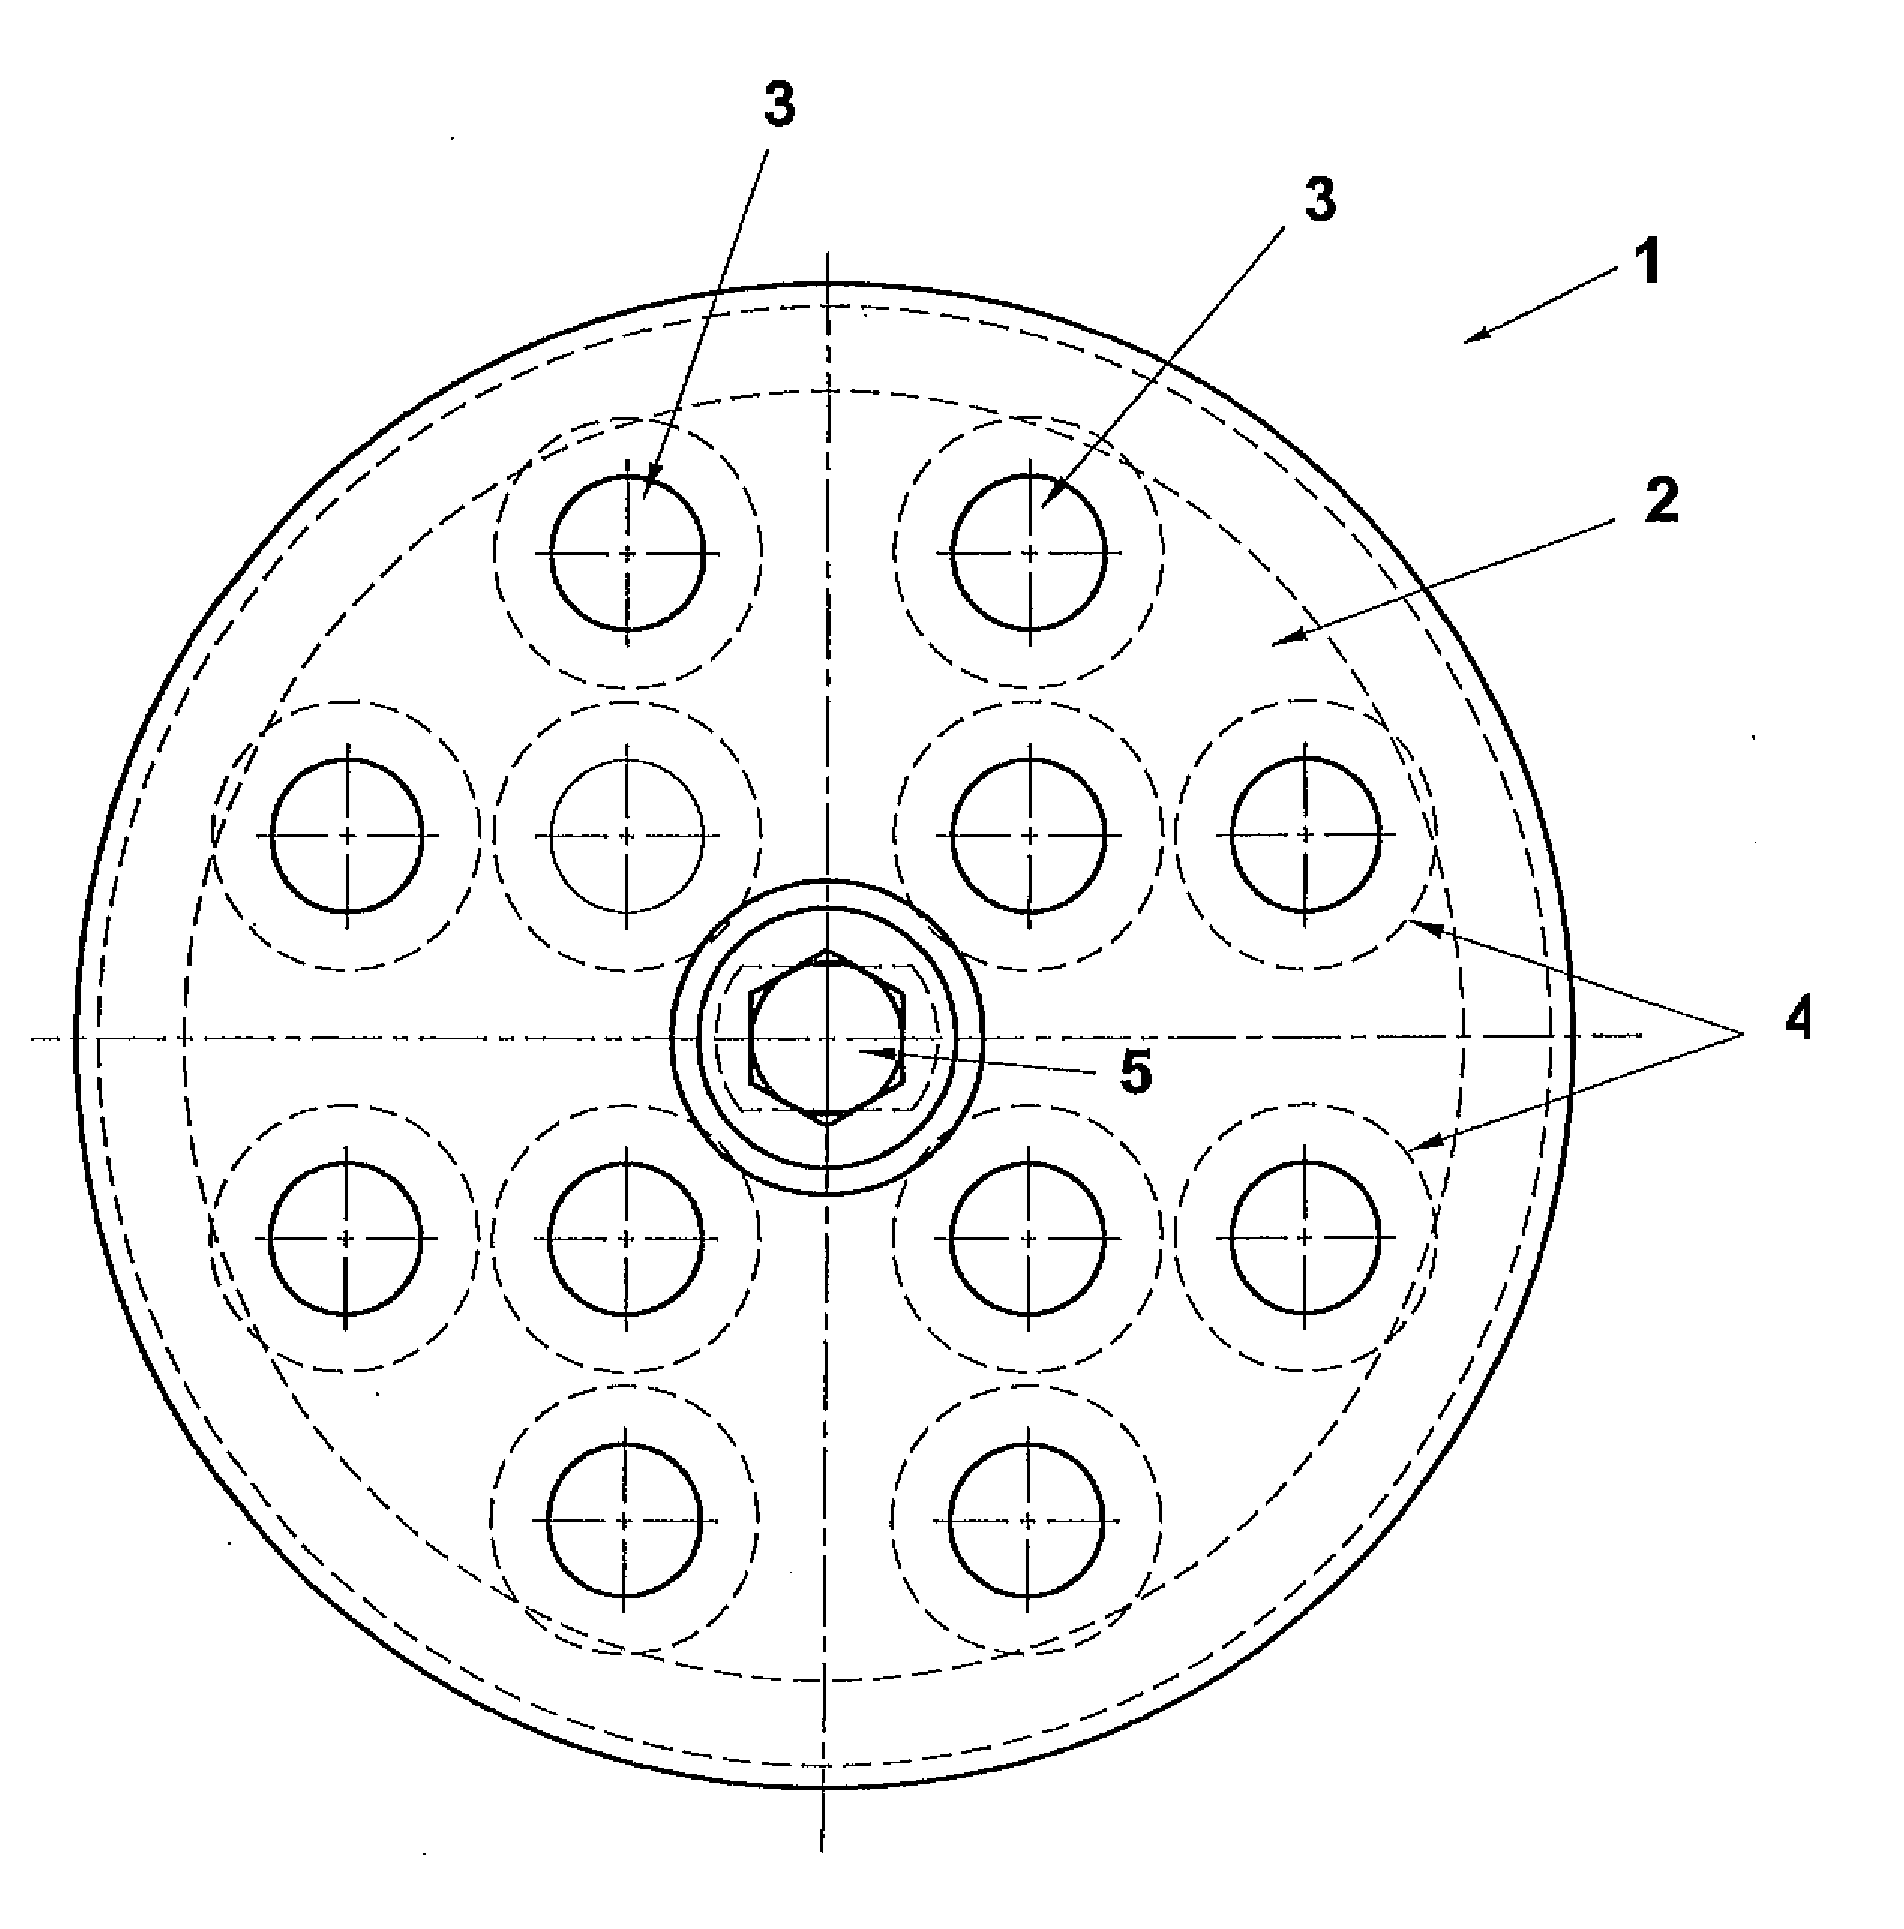 Device for picking or plucking poultry-feathers and an apparatus for driving such a device